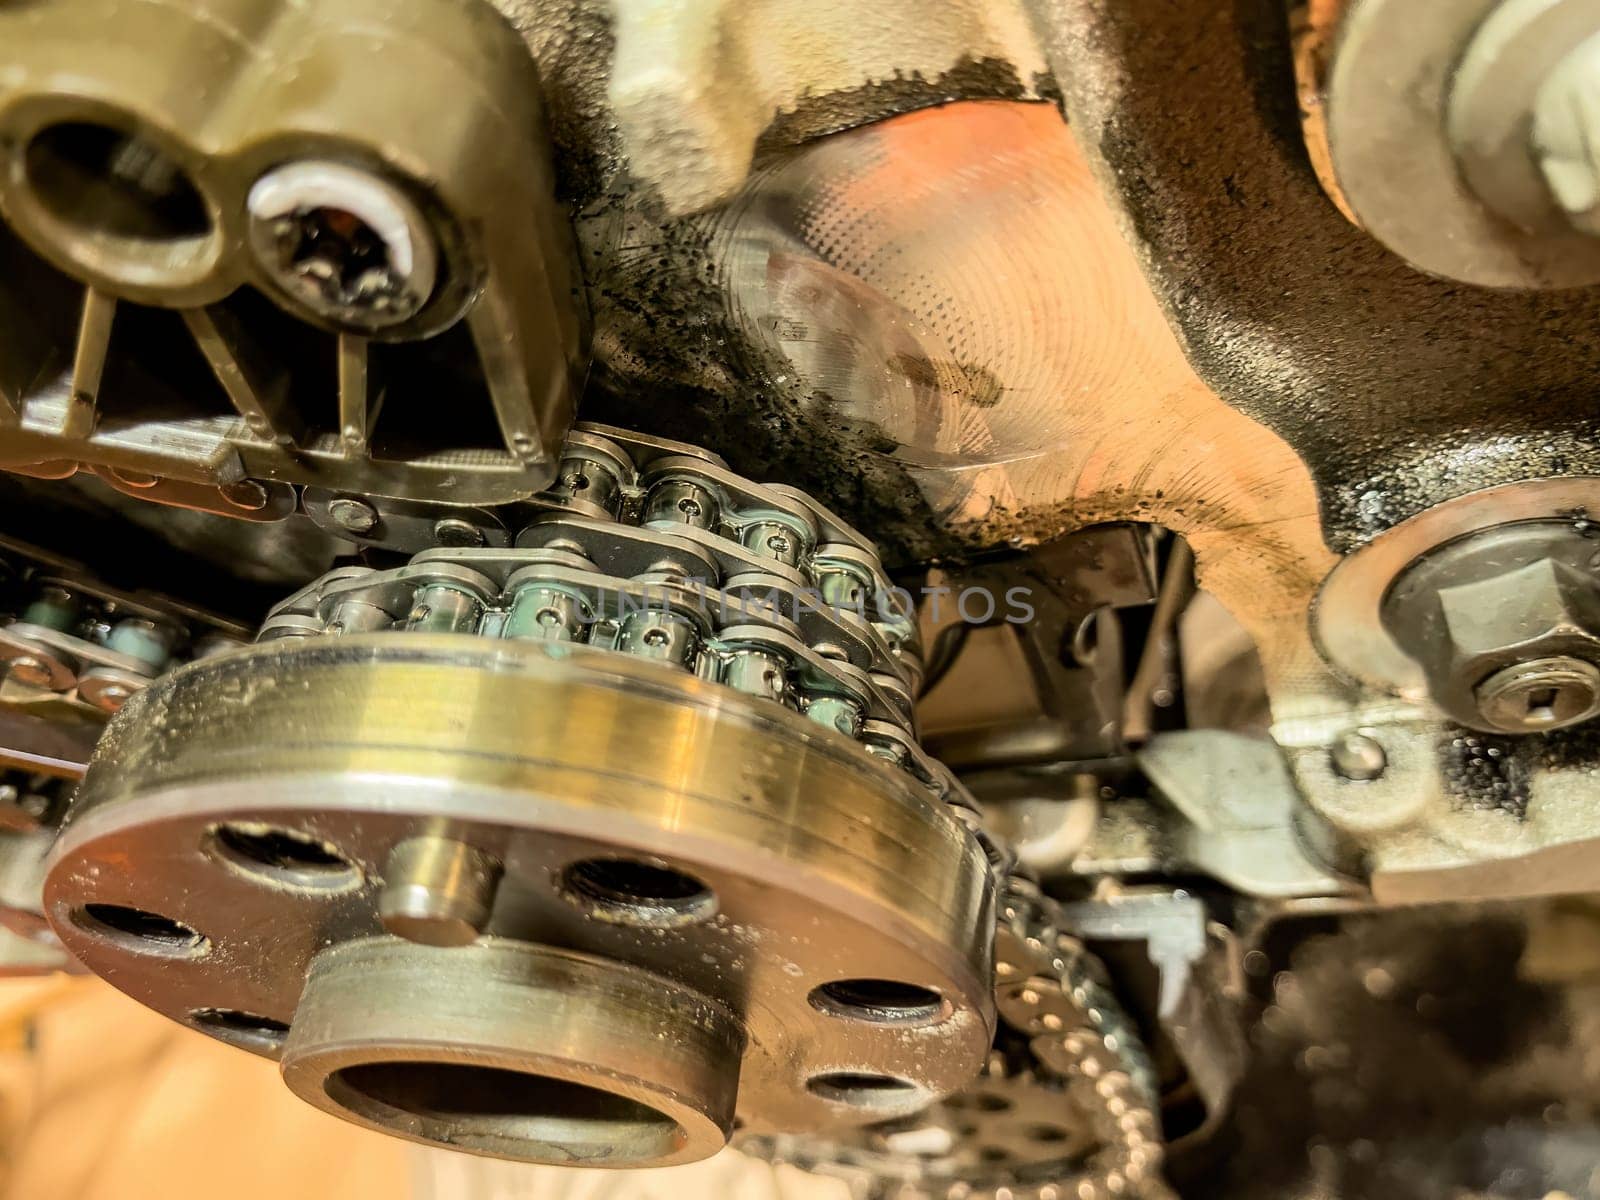 Close-up view of the timing chain inside a car engine.